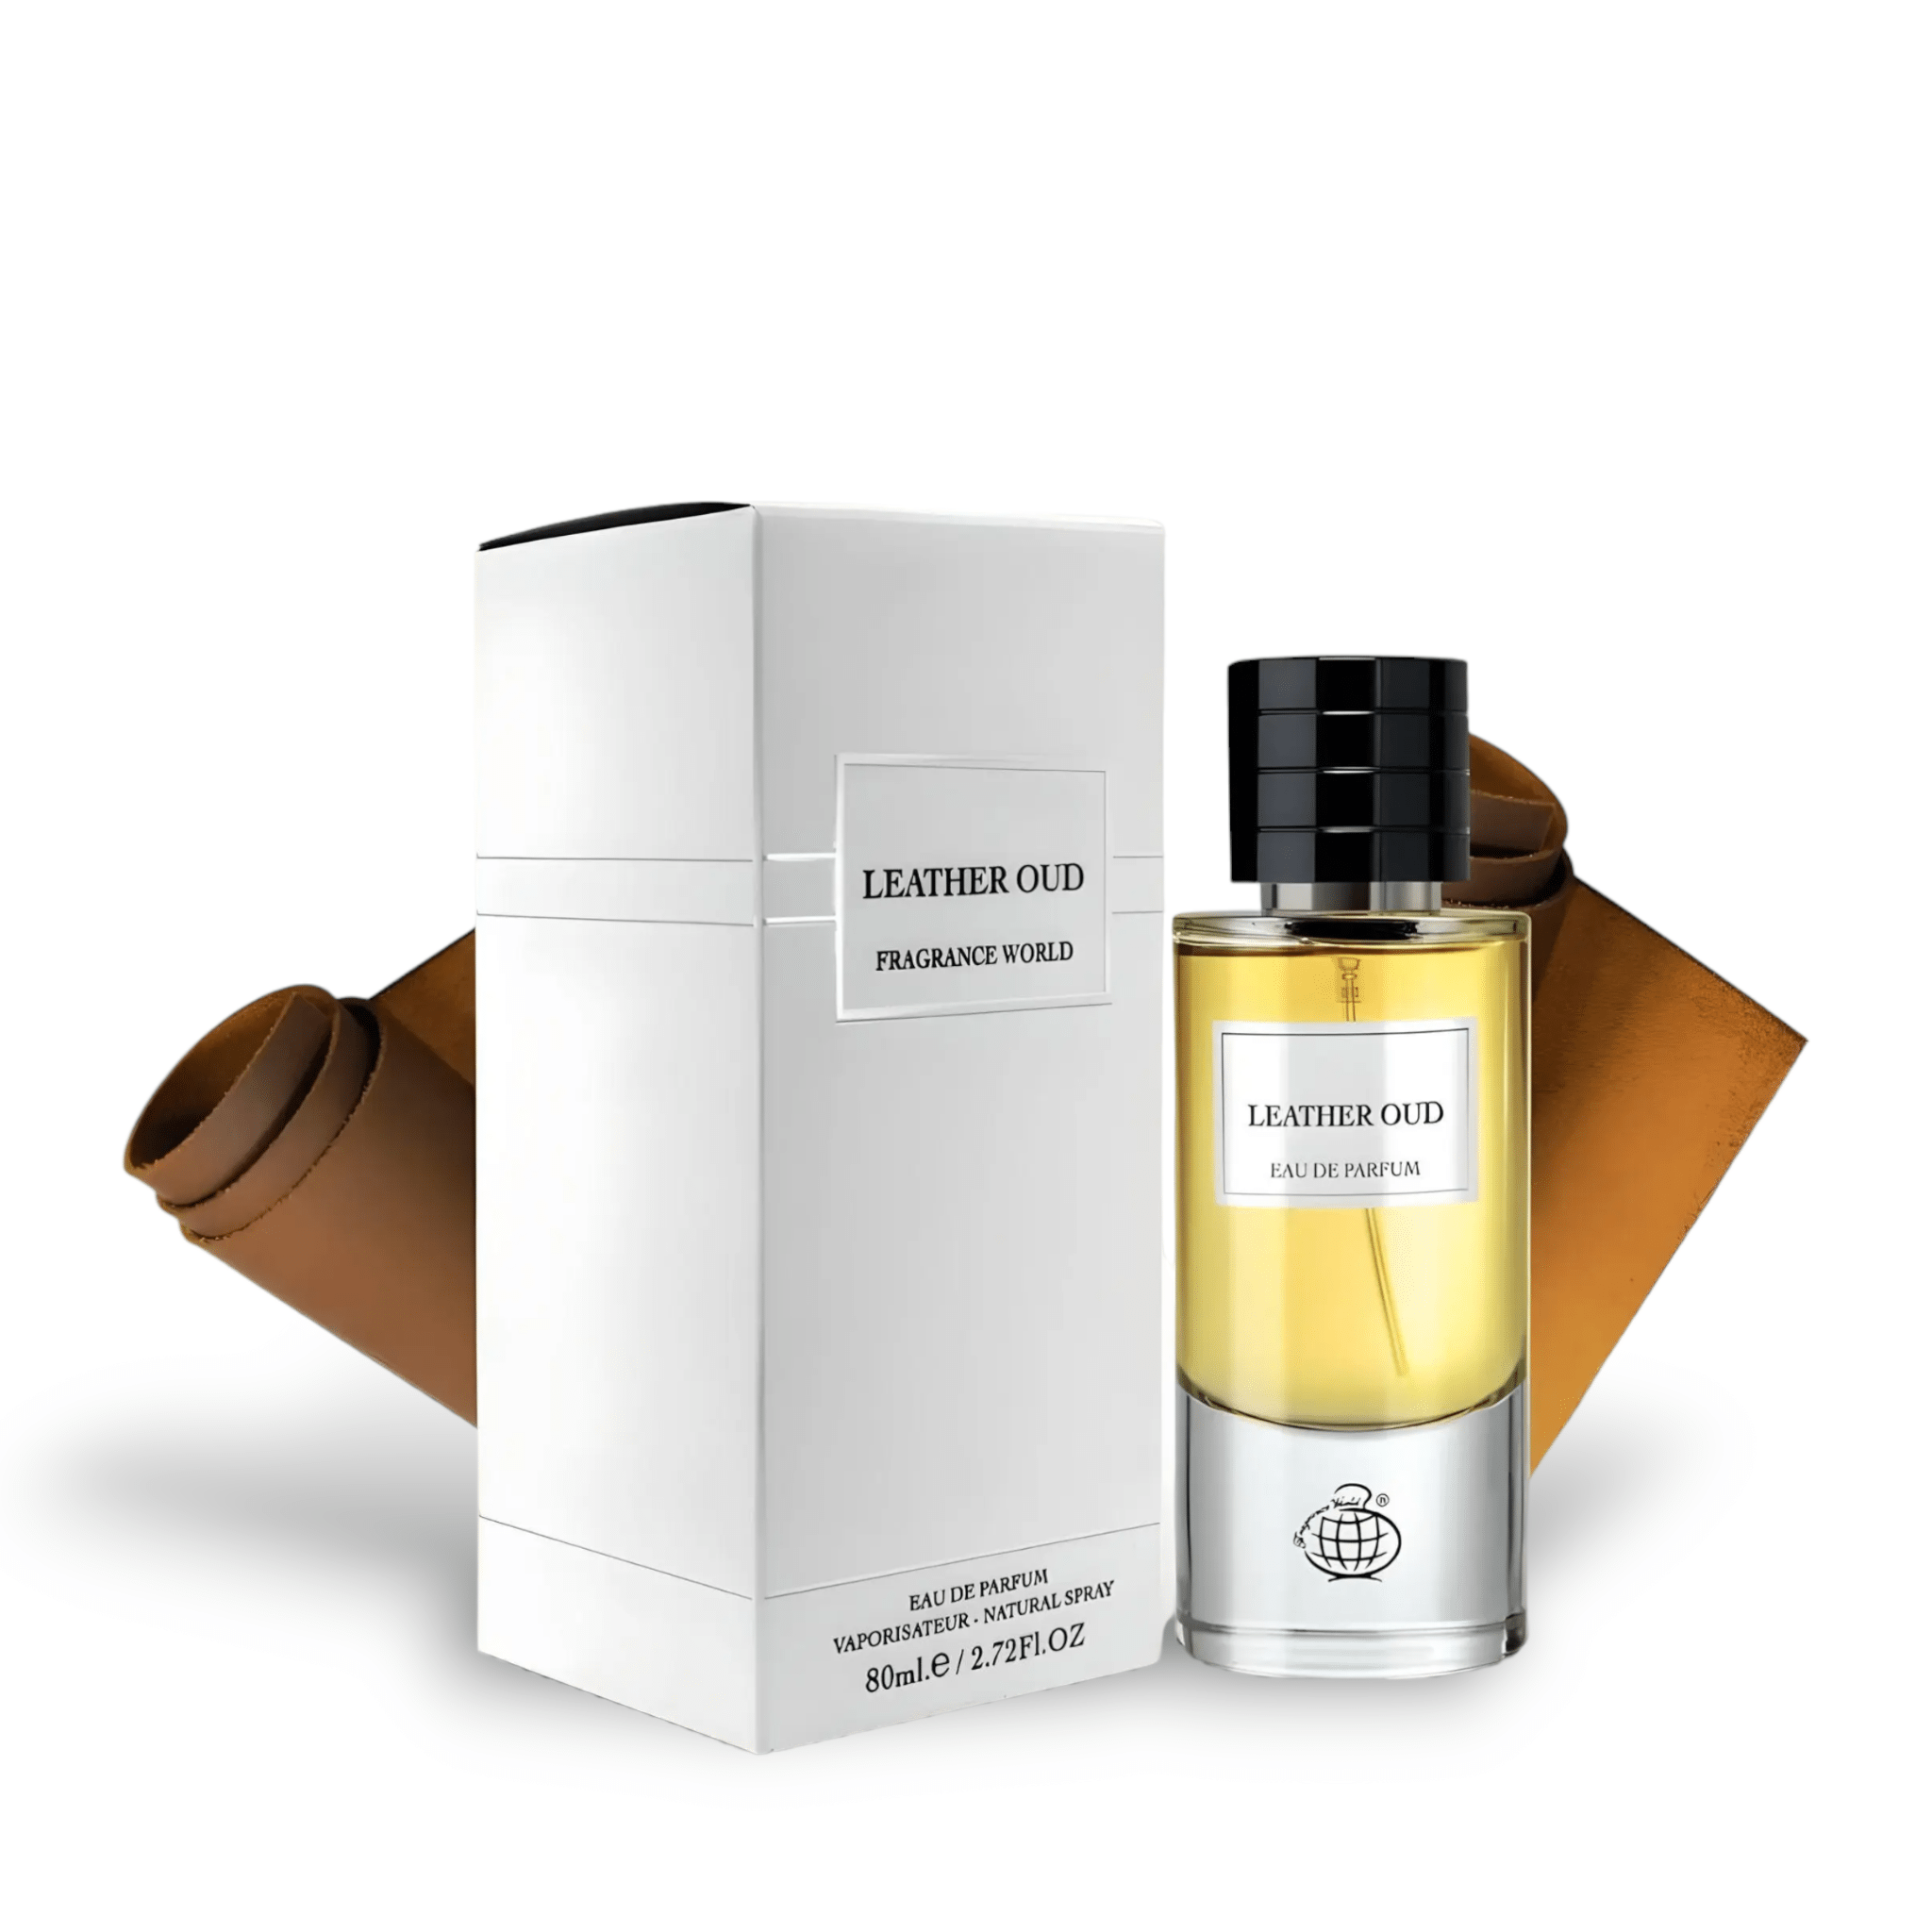 Leather Oud Perfume _ Eau De Parfum By Fragrance World (Inspired By Leather Oud)